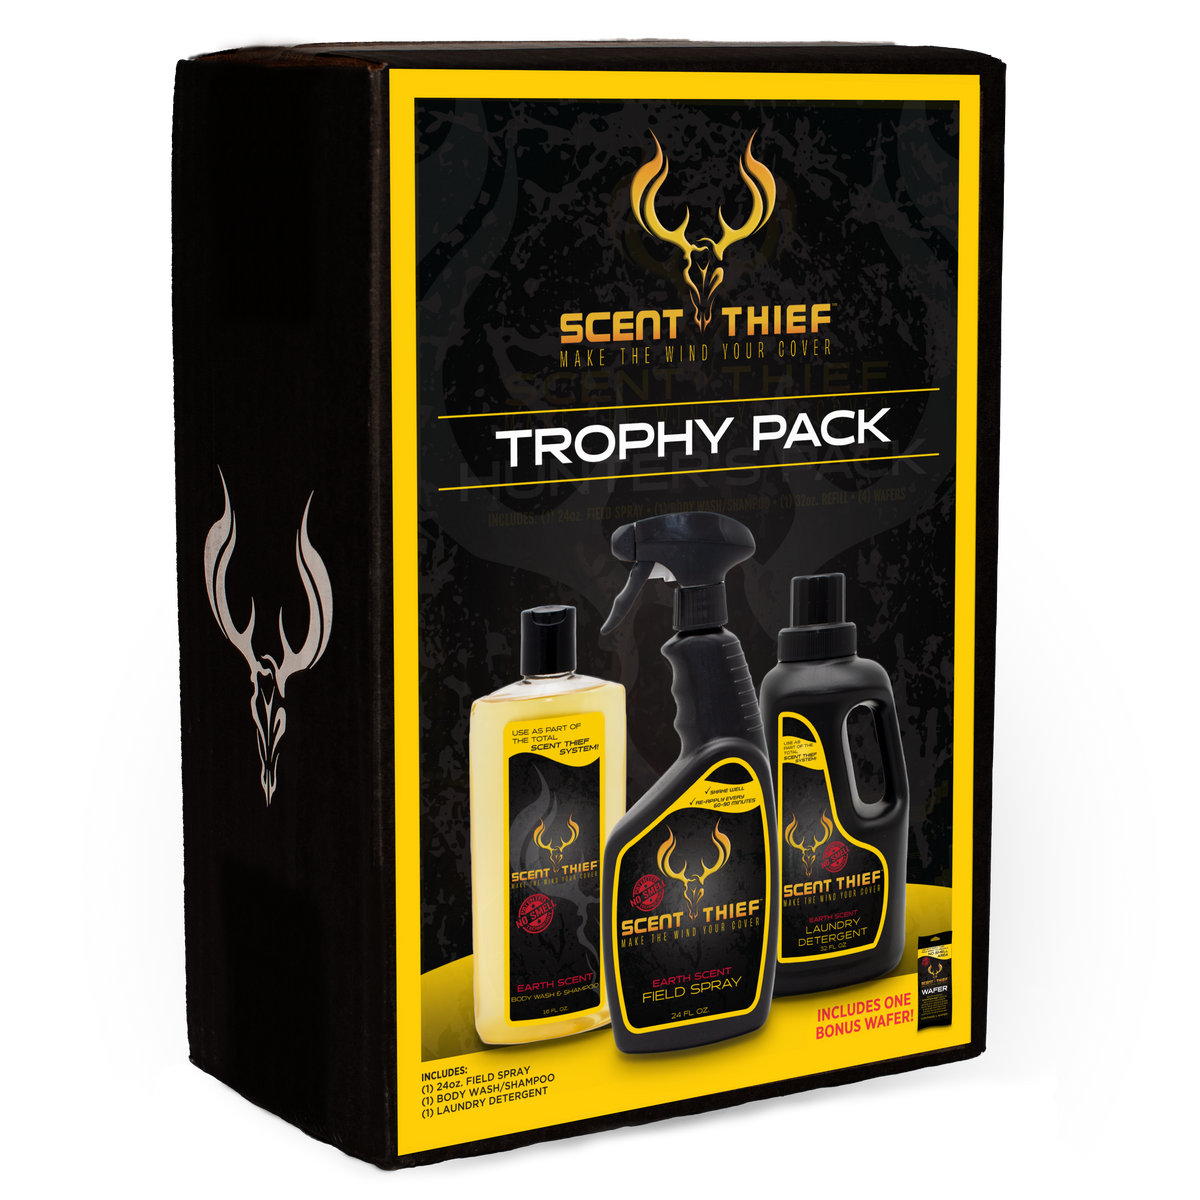 The Scent Thief Trophy Pack